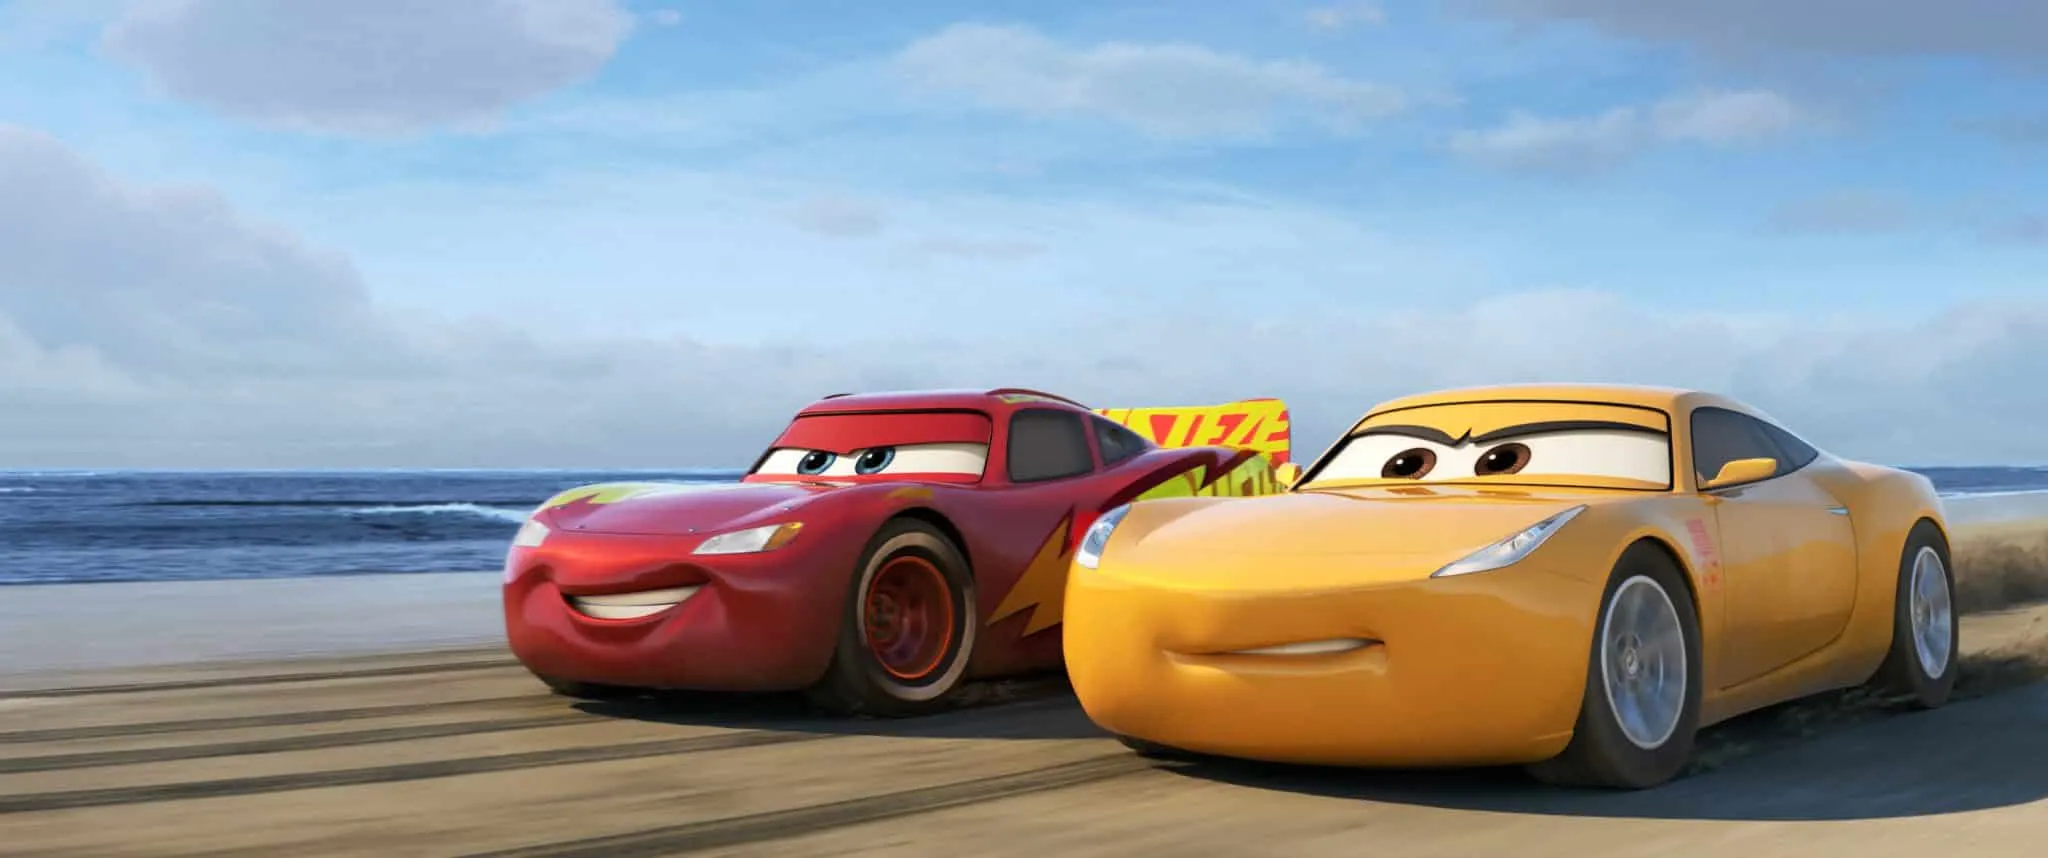 Pixar in a Box + NEW Cars 3 Trailer!! #Cars3Event